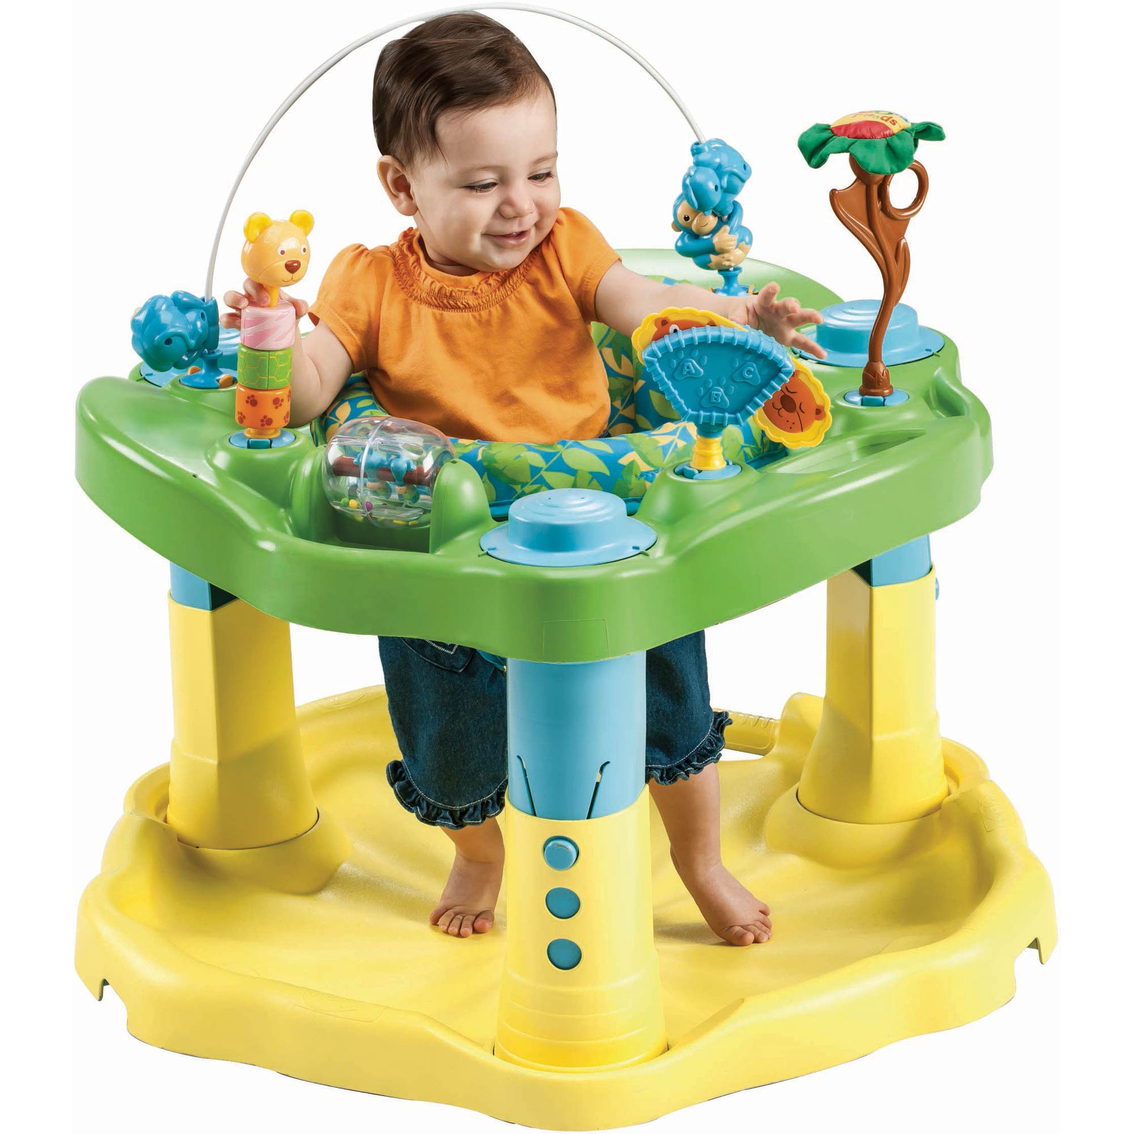 Evenflo ExerSaucer Mega Bounce and Learn Activity Center